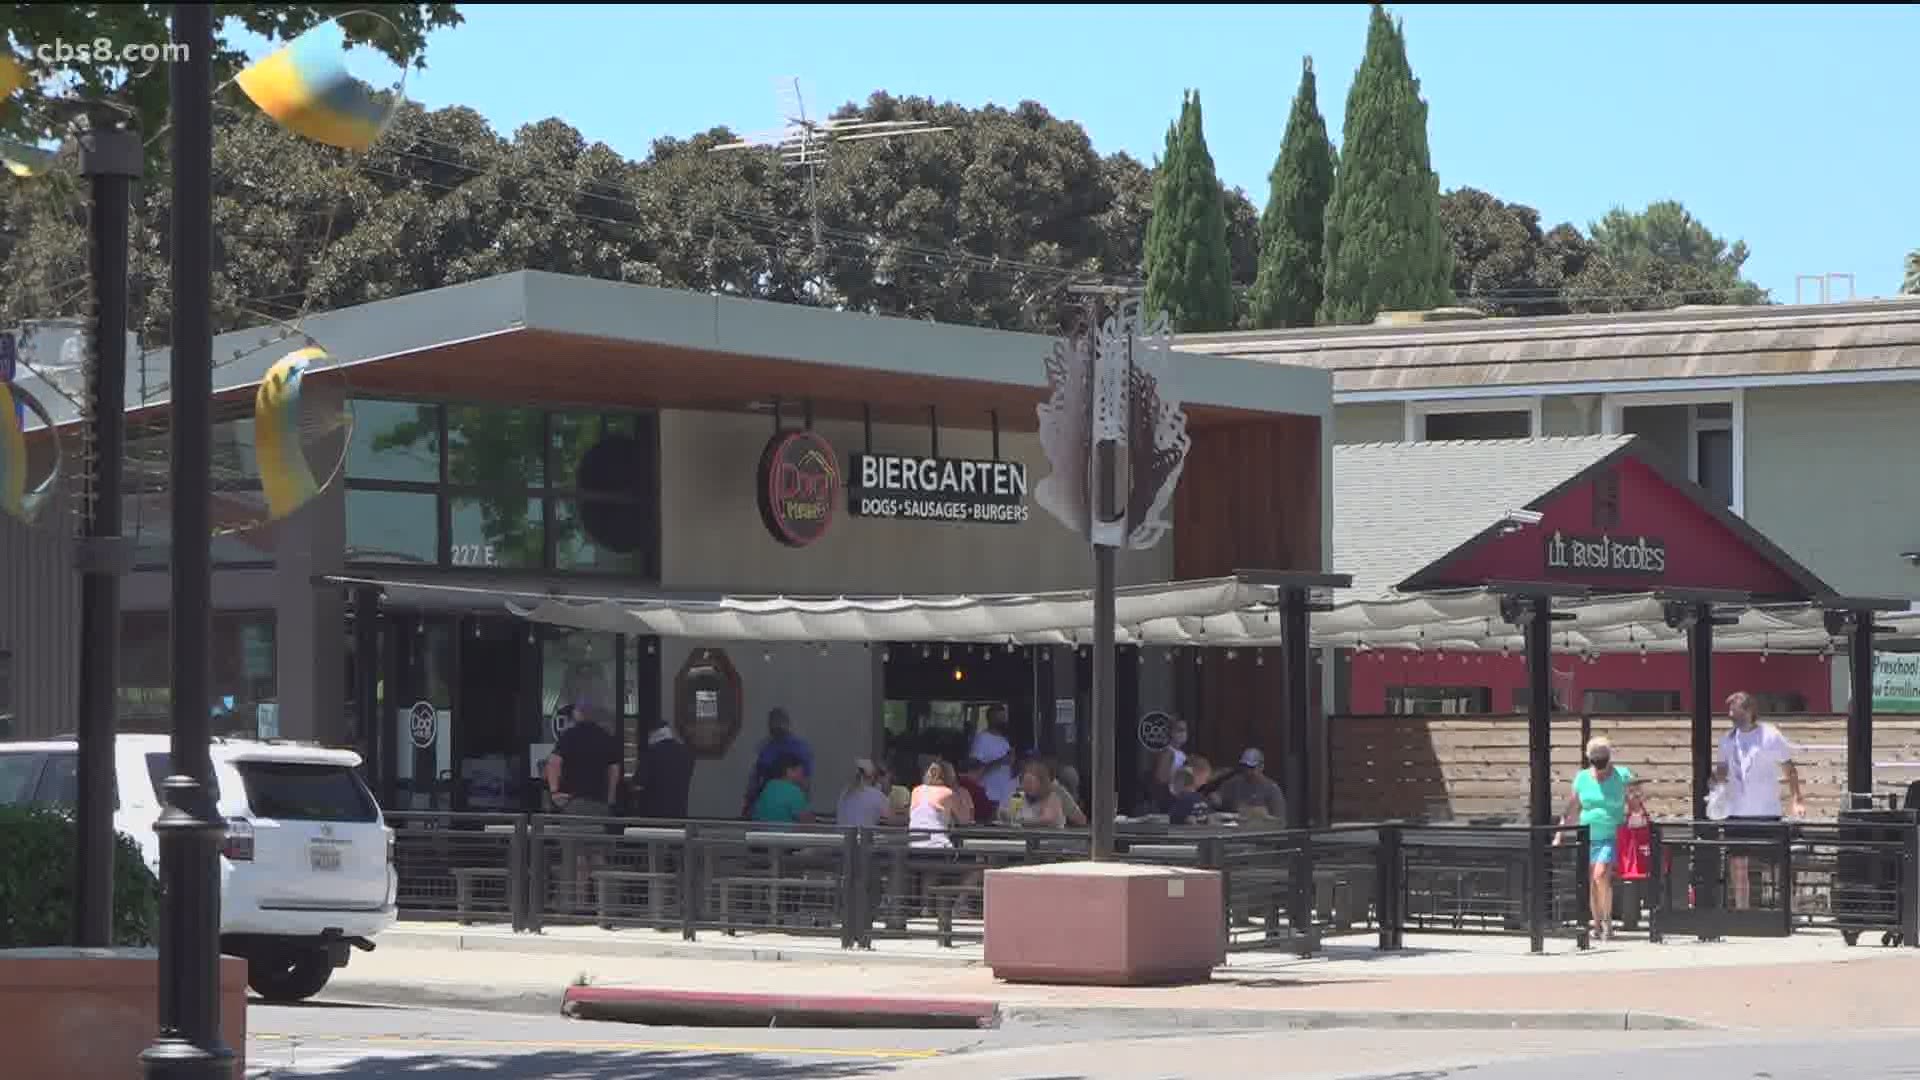 In June, the Vista City Council voted to approve temporarily relaxing regulations related to outdoor seating for restaurants and microbreweries due to COVID-19.